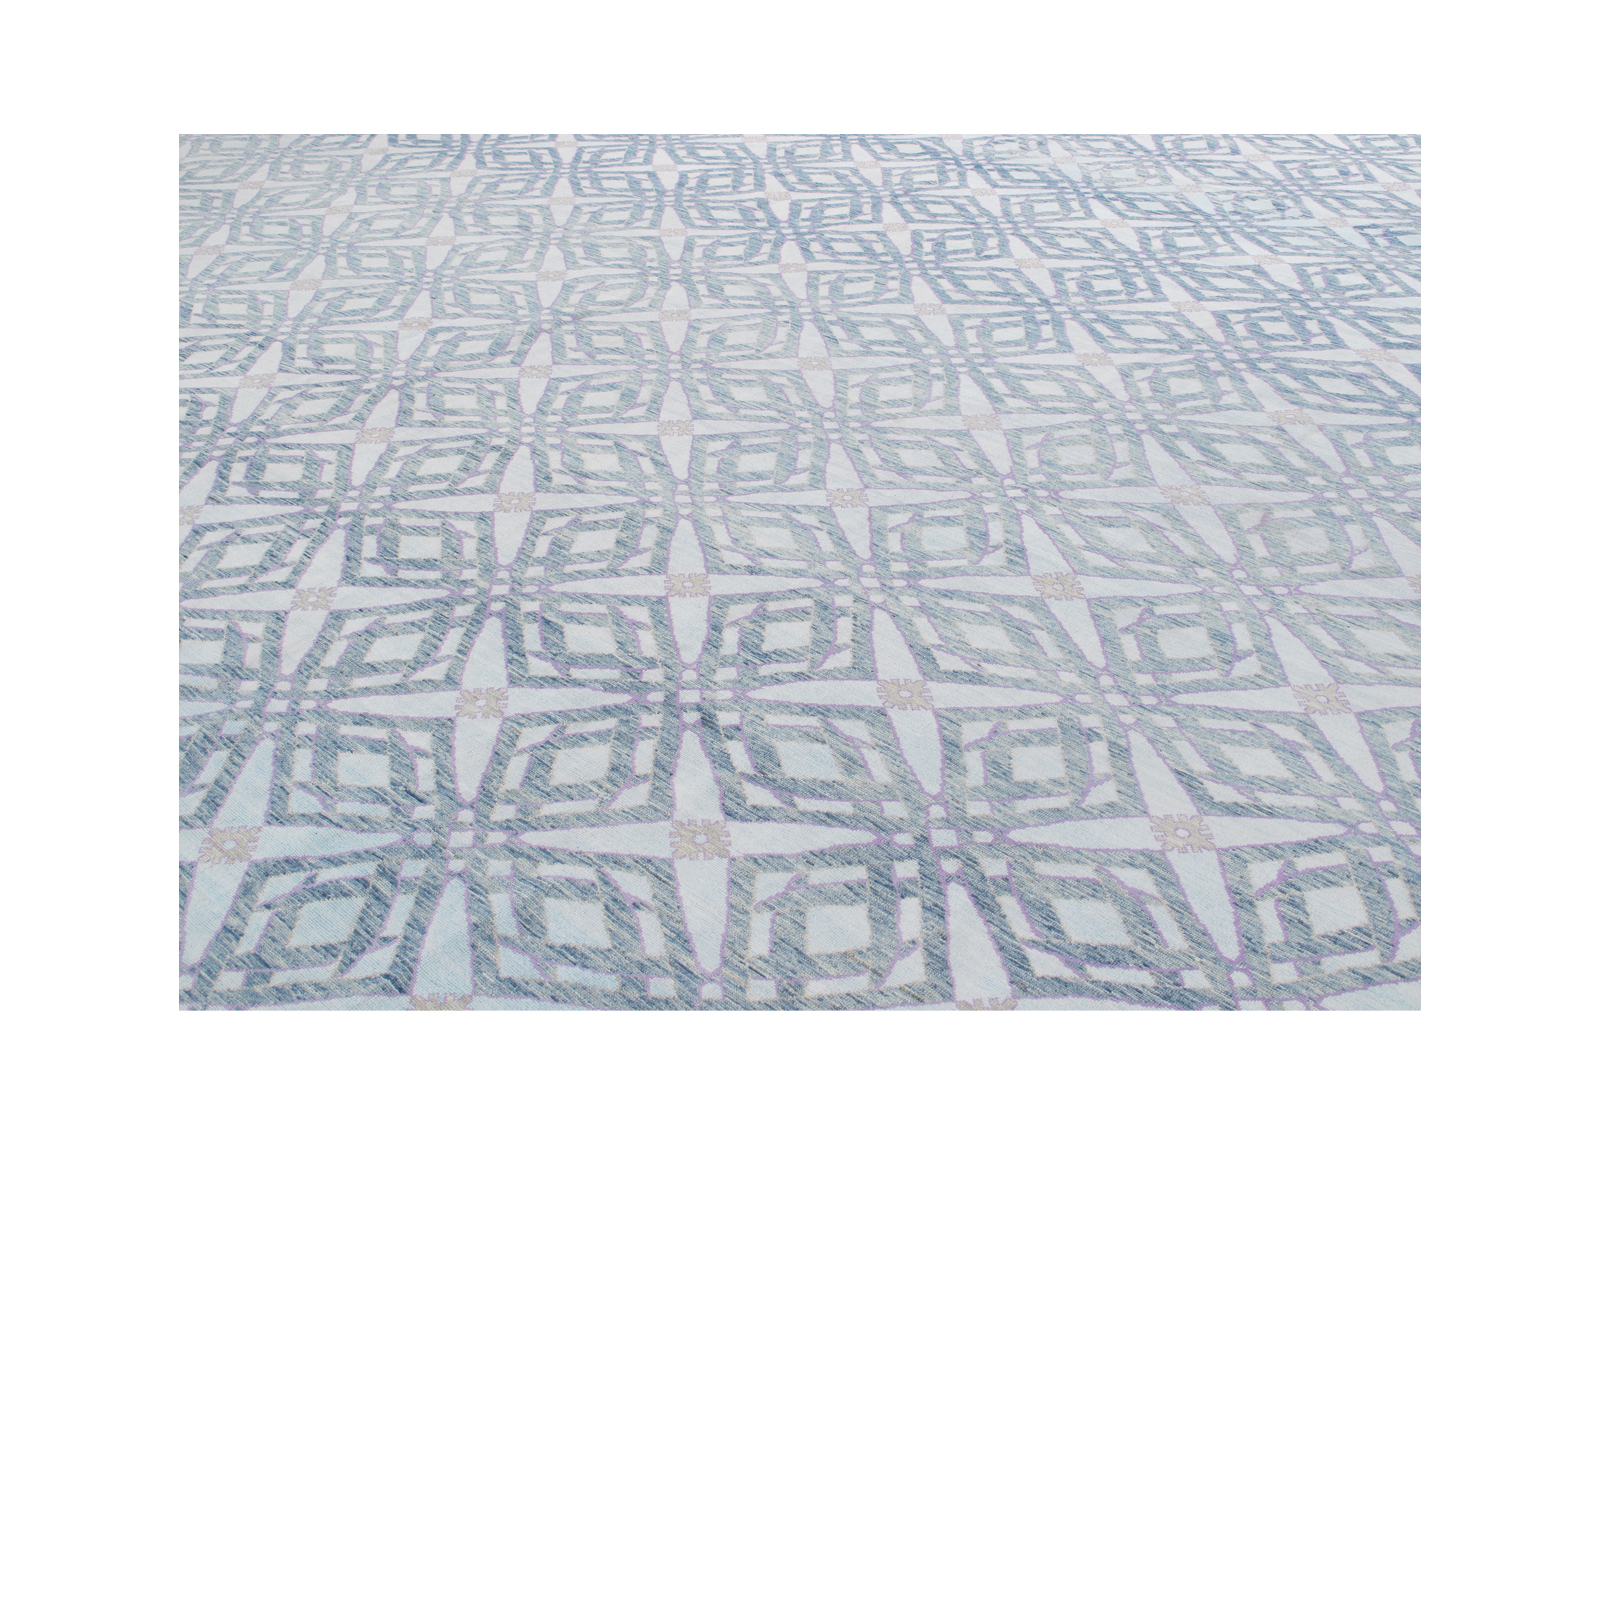 Our Patina rug is hand-knotted, and made from the finest hand-carded, hand-spun naturally dyed wool with silk accent.